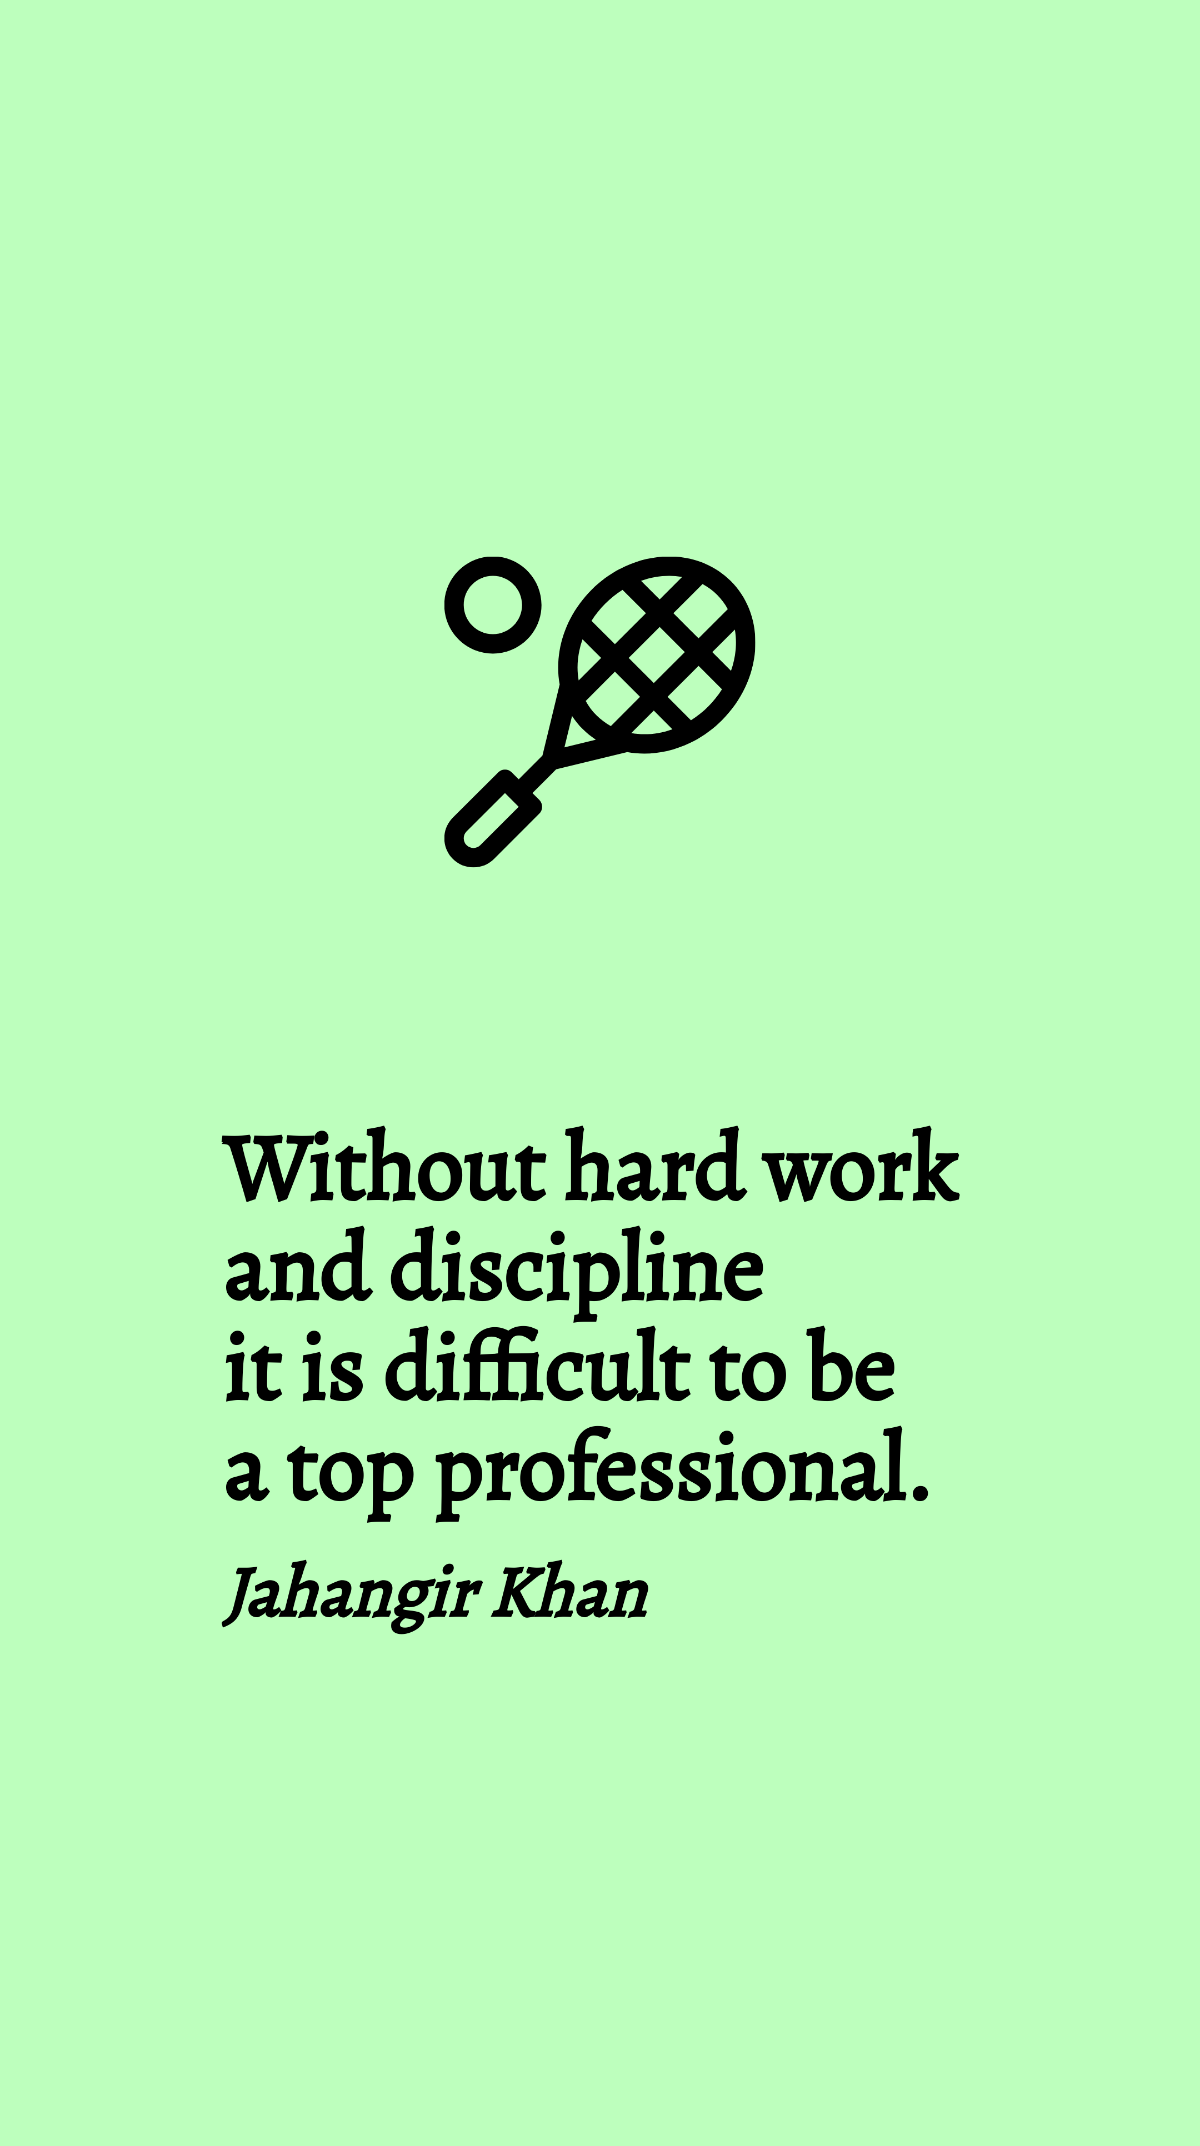 Jahangir Khan - Without hard work and discipline it is difficult to be a top professional.